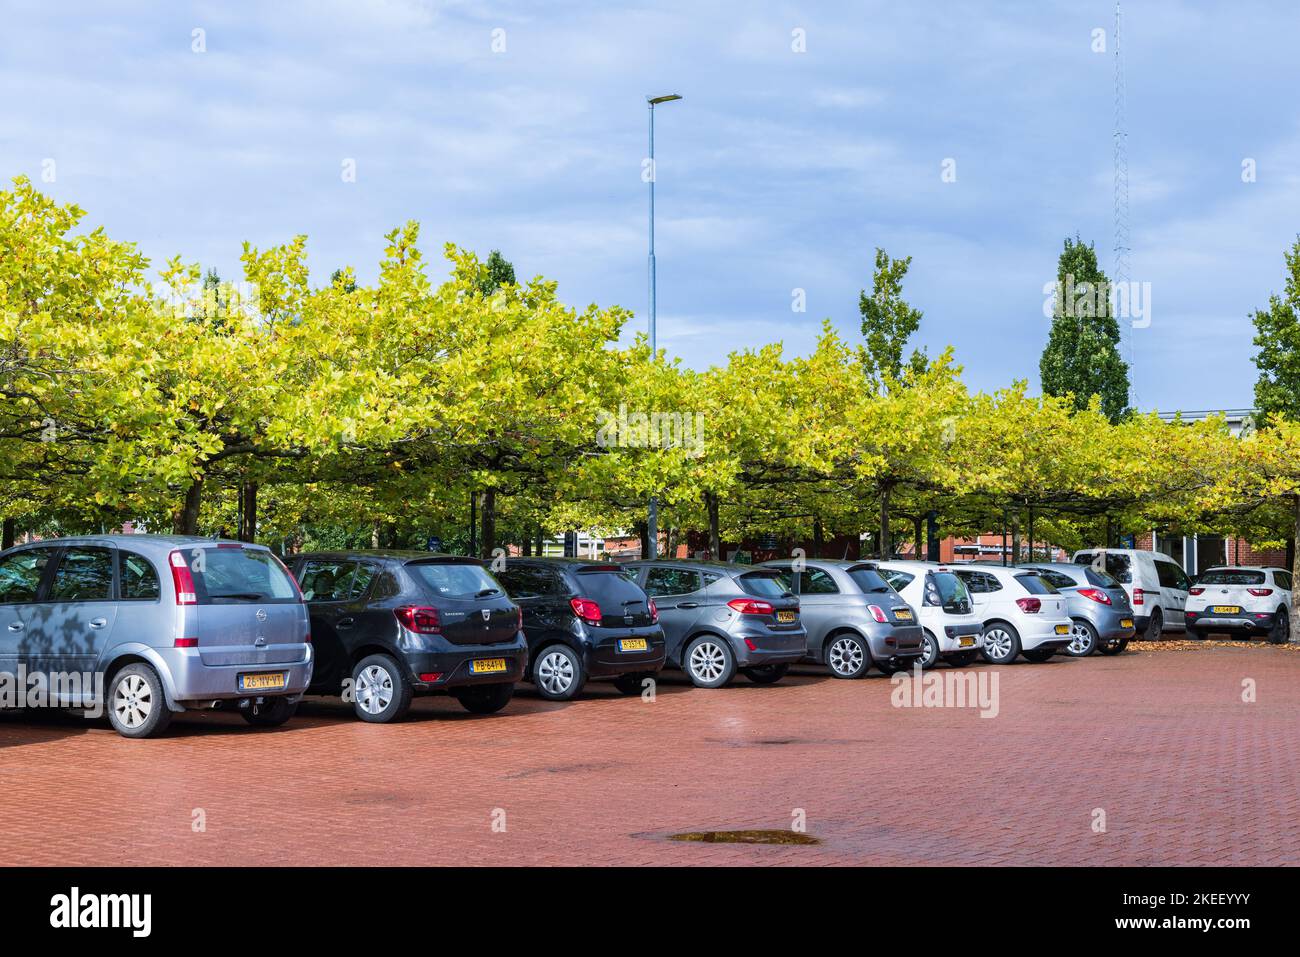 Zuidhorn, The Netherlands - September 25, 2022: City hall and green parking place in Zuidhorn municipality Groningen province in the Netherlands Stock Photo